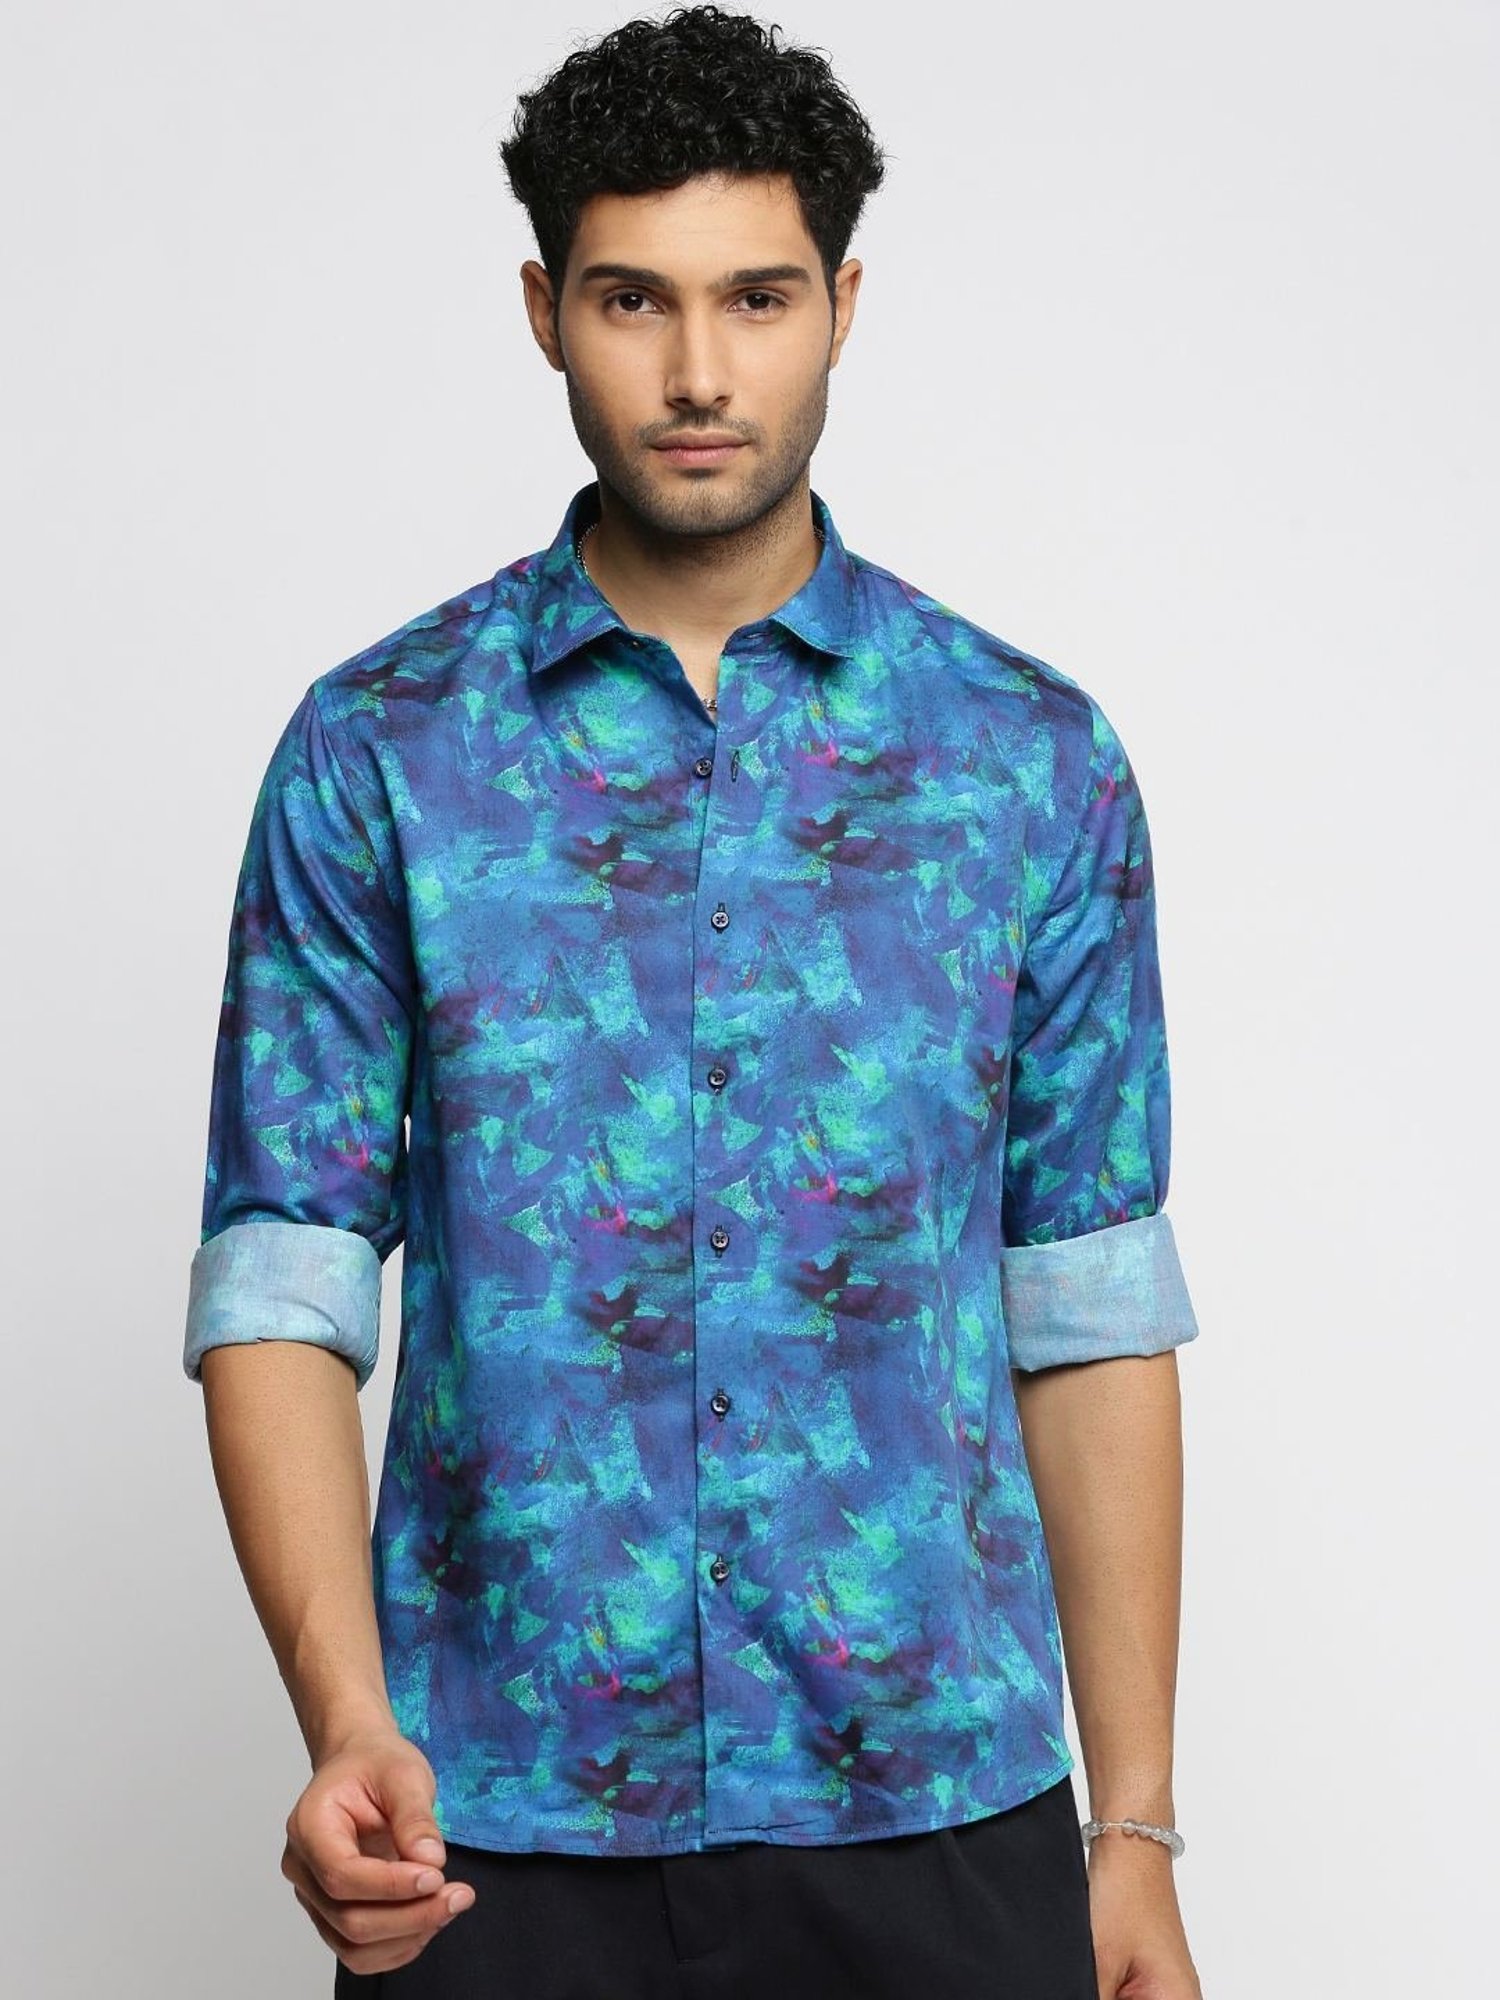 Buy Lee Teal Cotton Slim Fit Polo T-Shirts for Mens Online @ Tata CLiQ